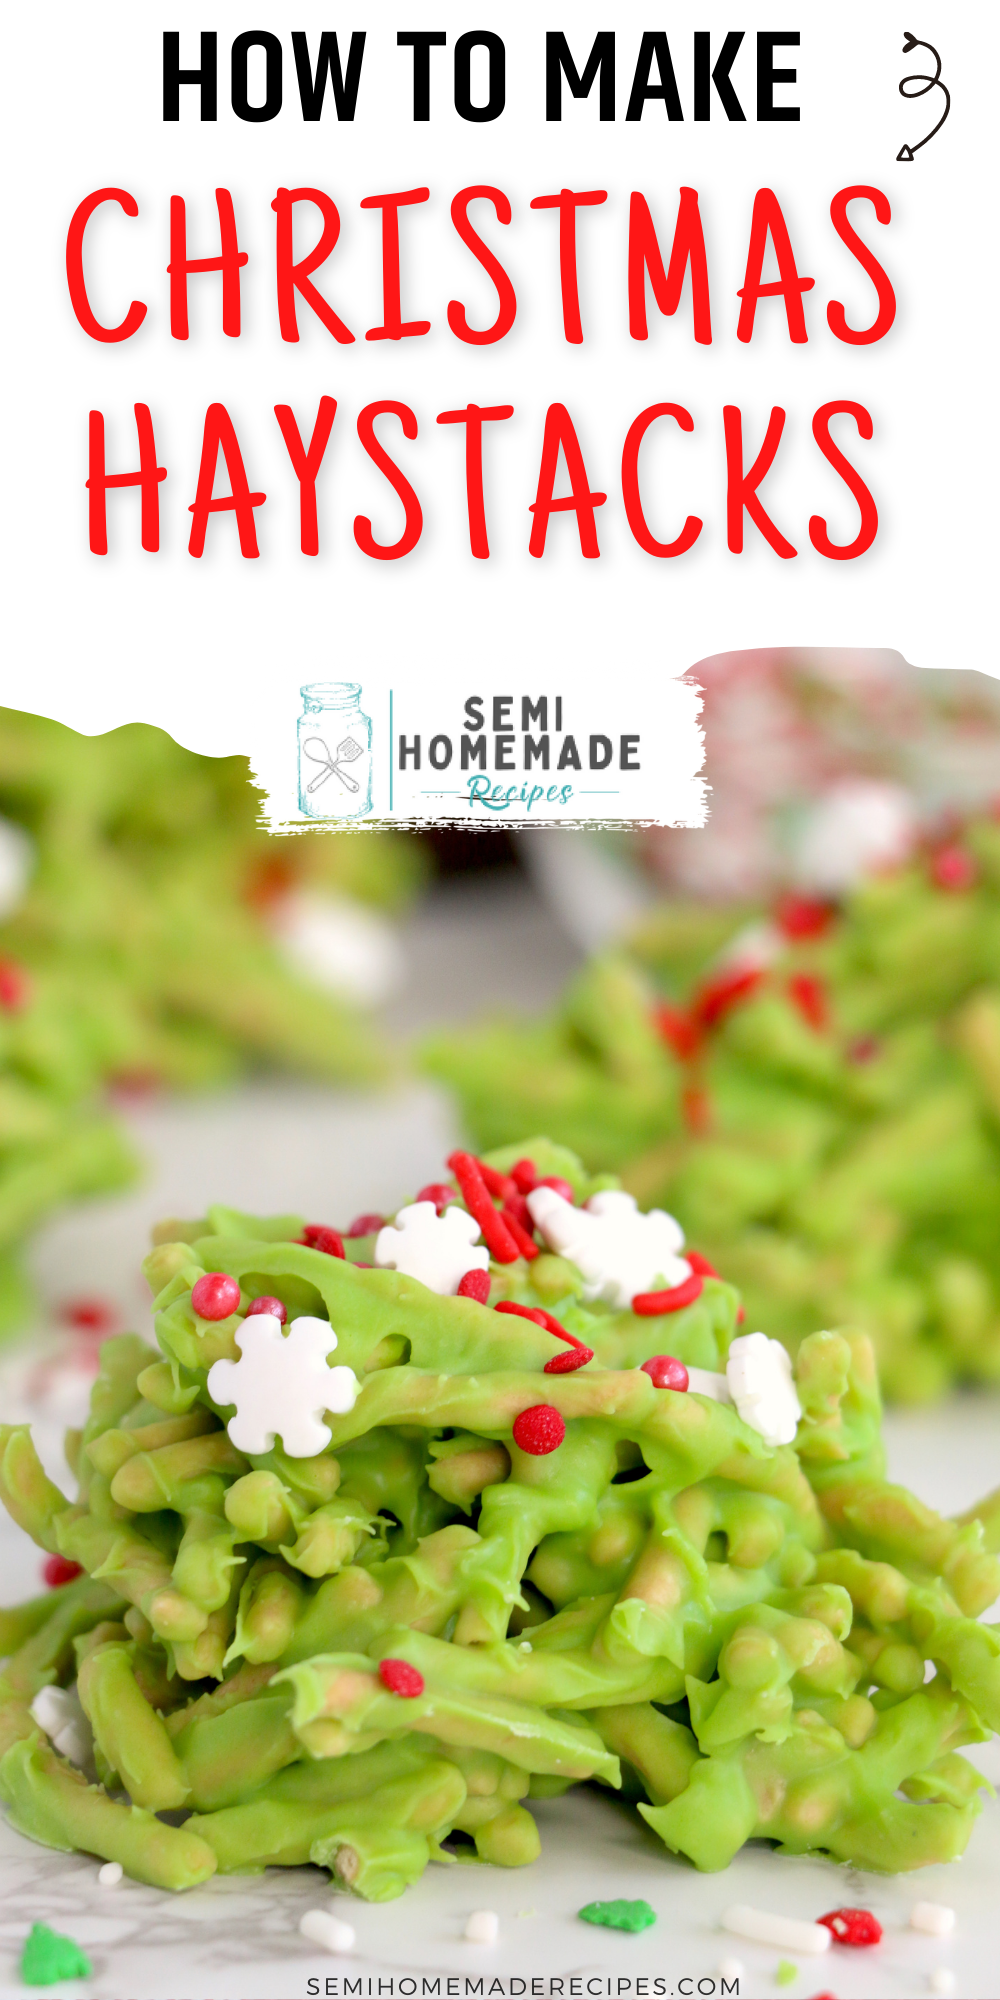 Christmas Haystacks Candy is an old fashioned vintage candy that people around here have been making for decades. This festive and easy Christmas dessert combines chow mein noodles, white chocolate and green coloring together with holiday sprinkles for a super cute treat.
